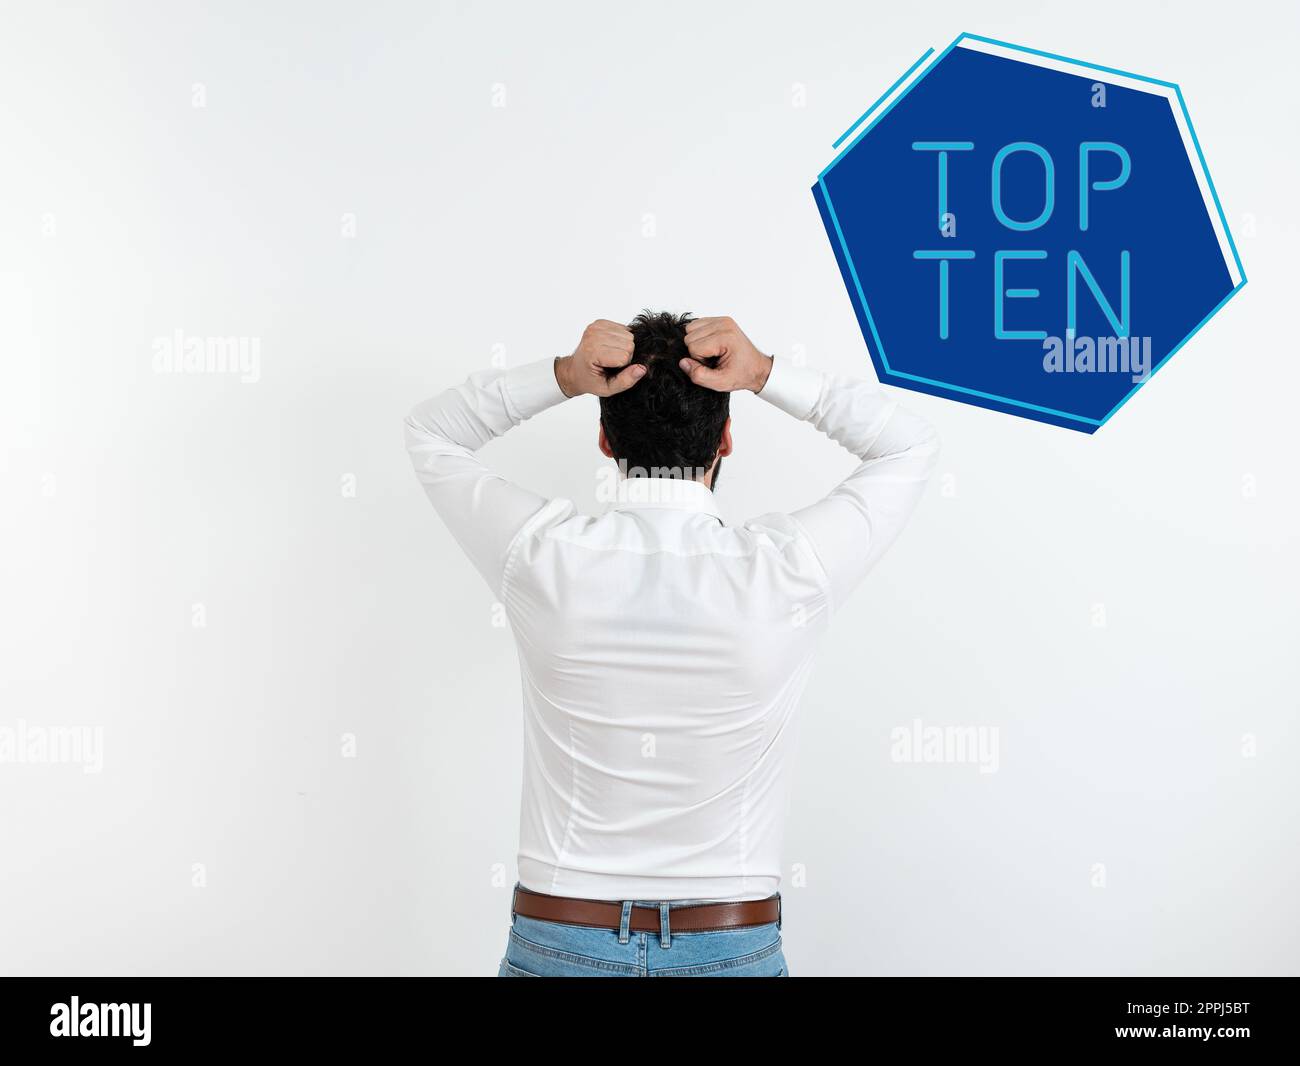 Handwriting text Top Ten. Business showcase the ten most popular songs or recordings in the popular music charts Stock Photo